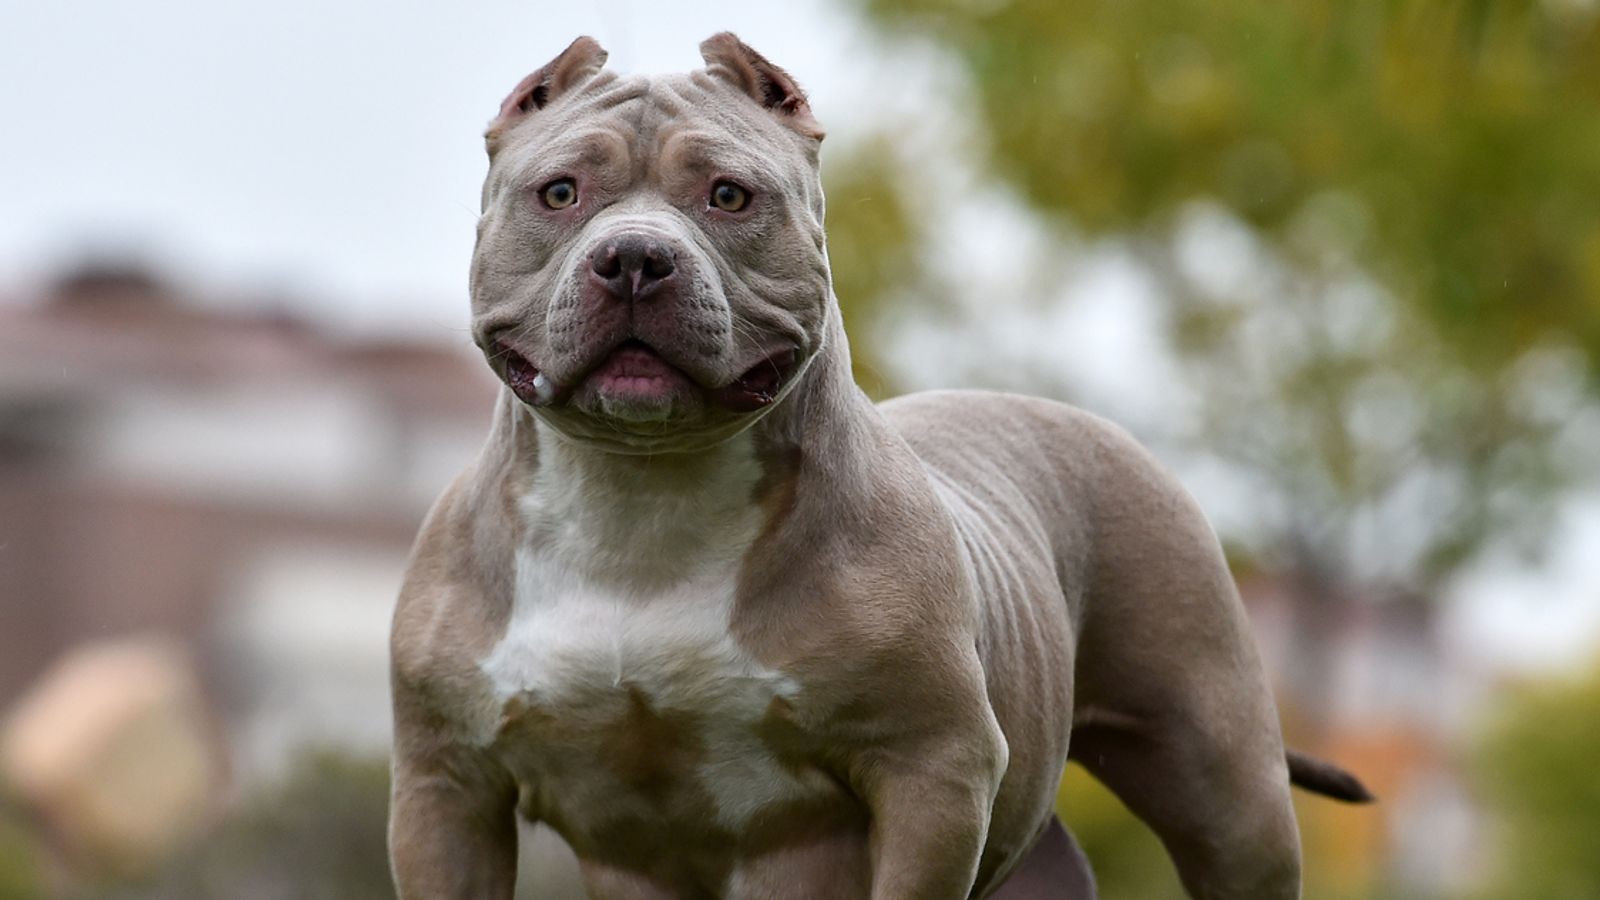 American XL bully dogs to be banned after attacks, Rishi Sunak says